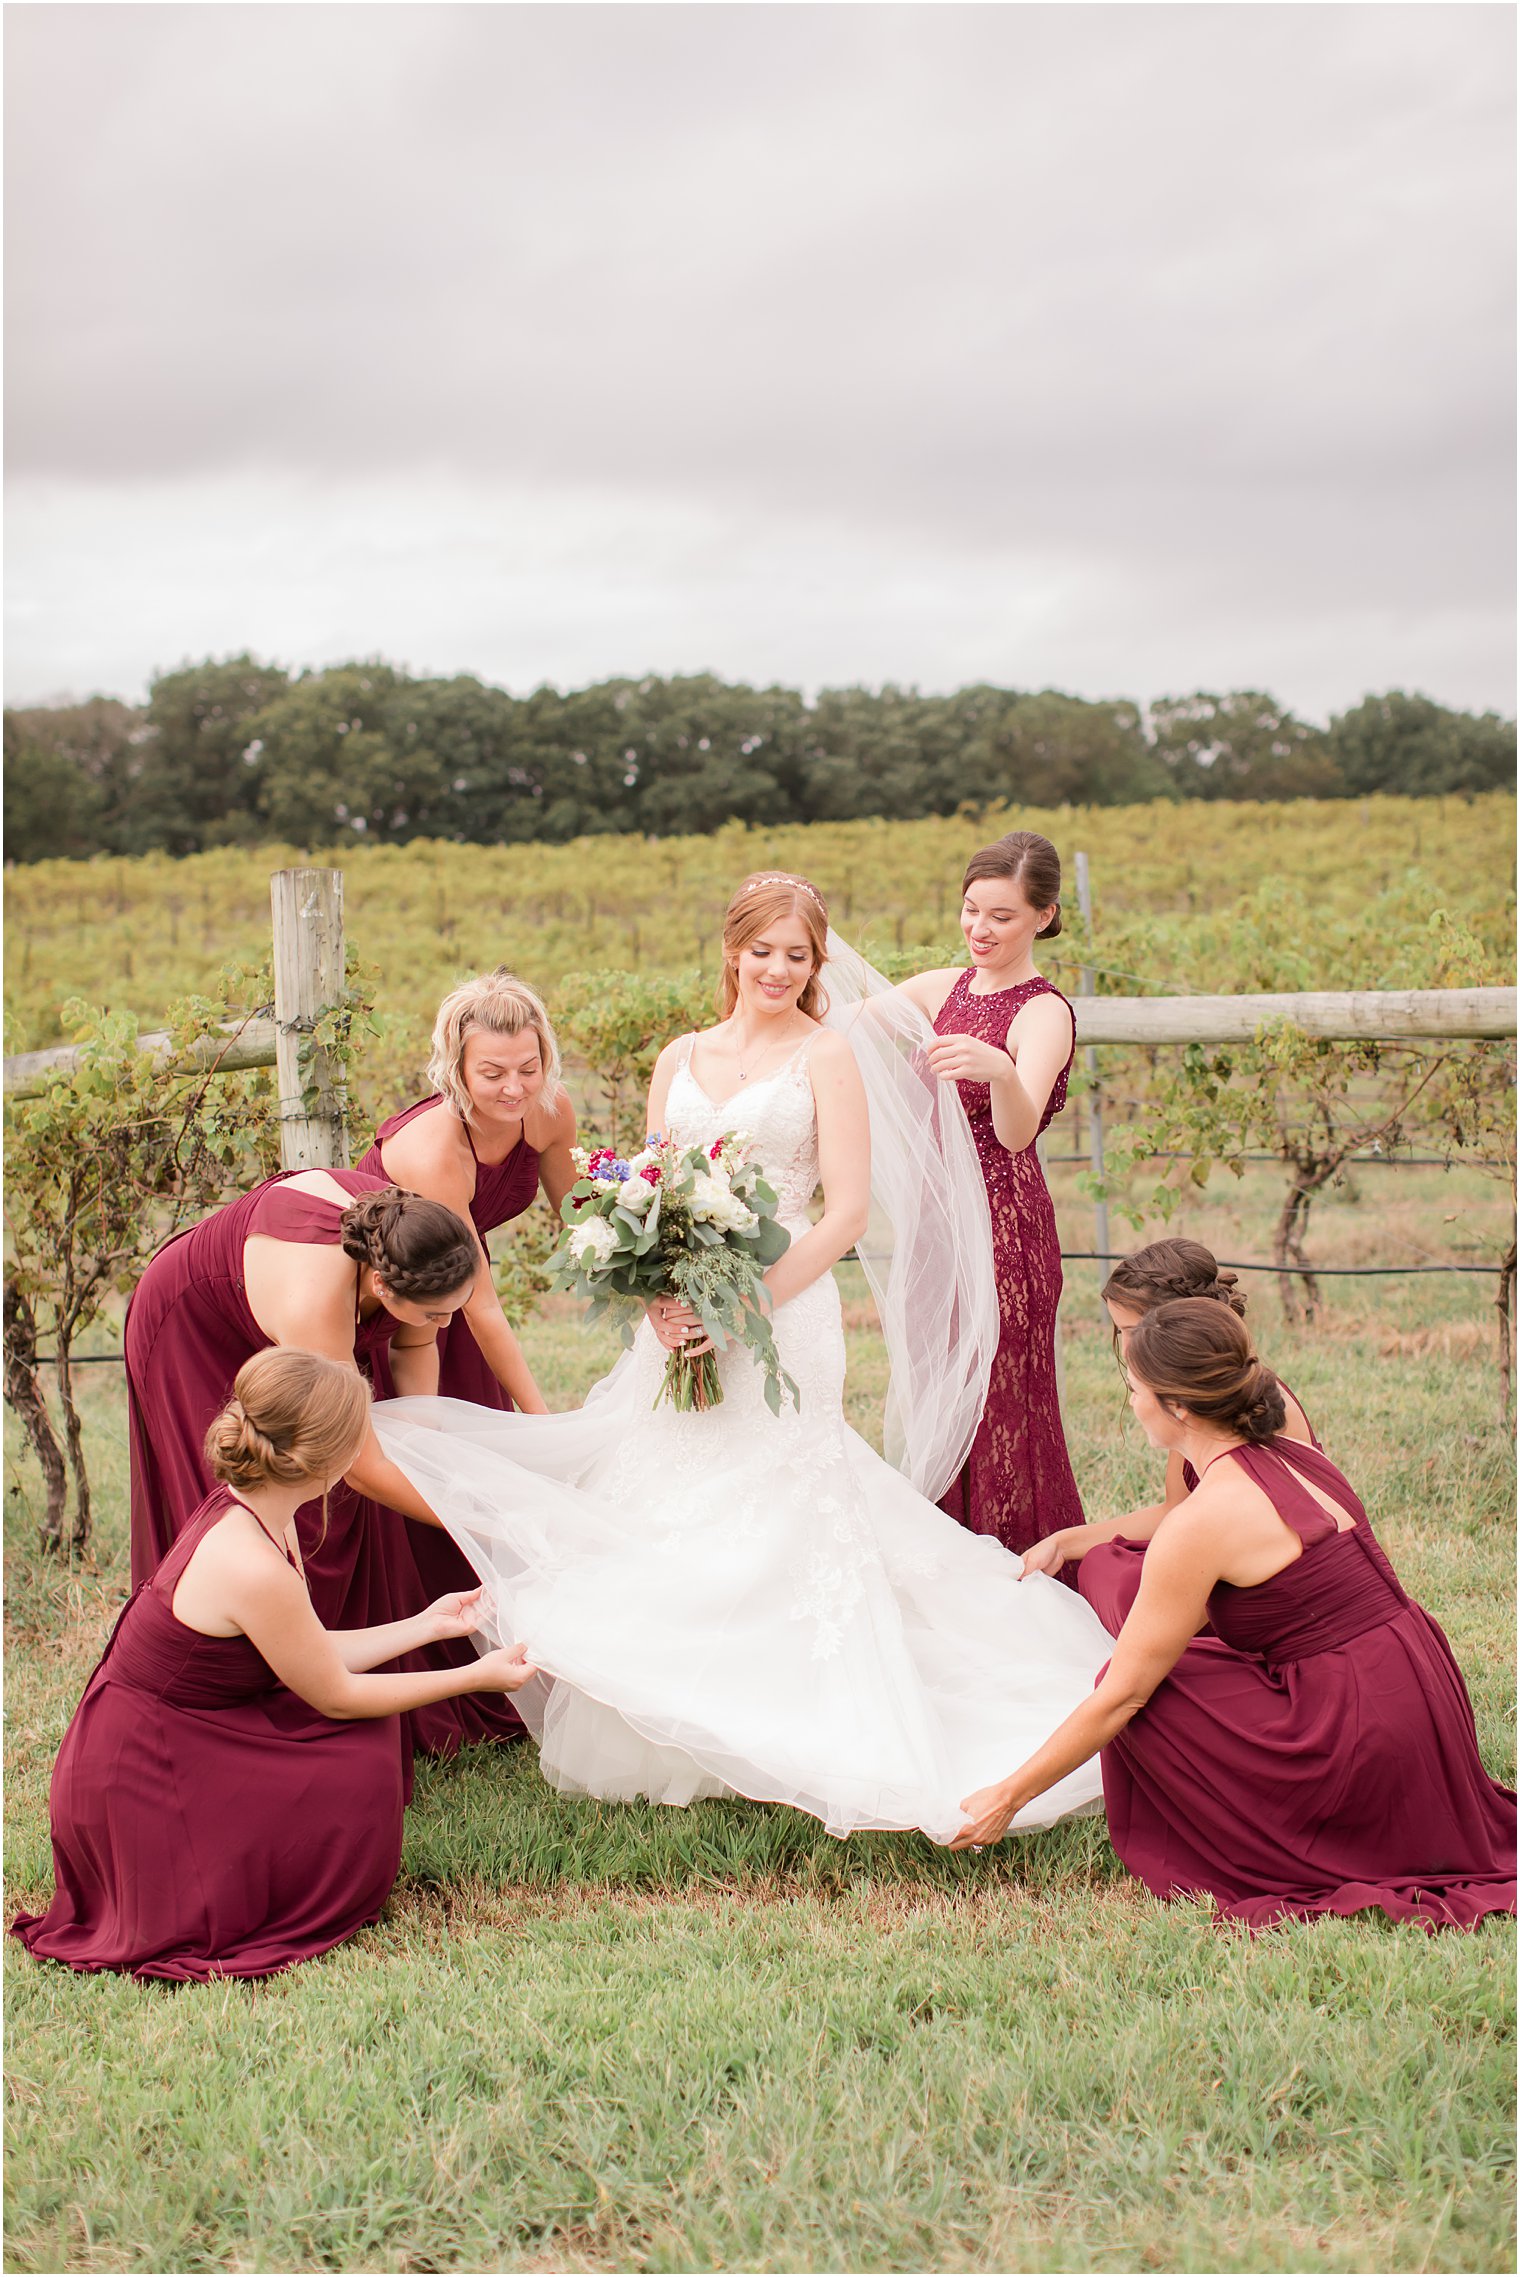 Bridesmaids helping bride with dress and veil